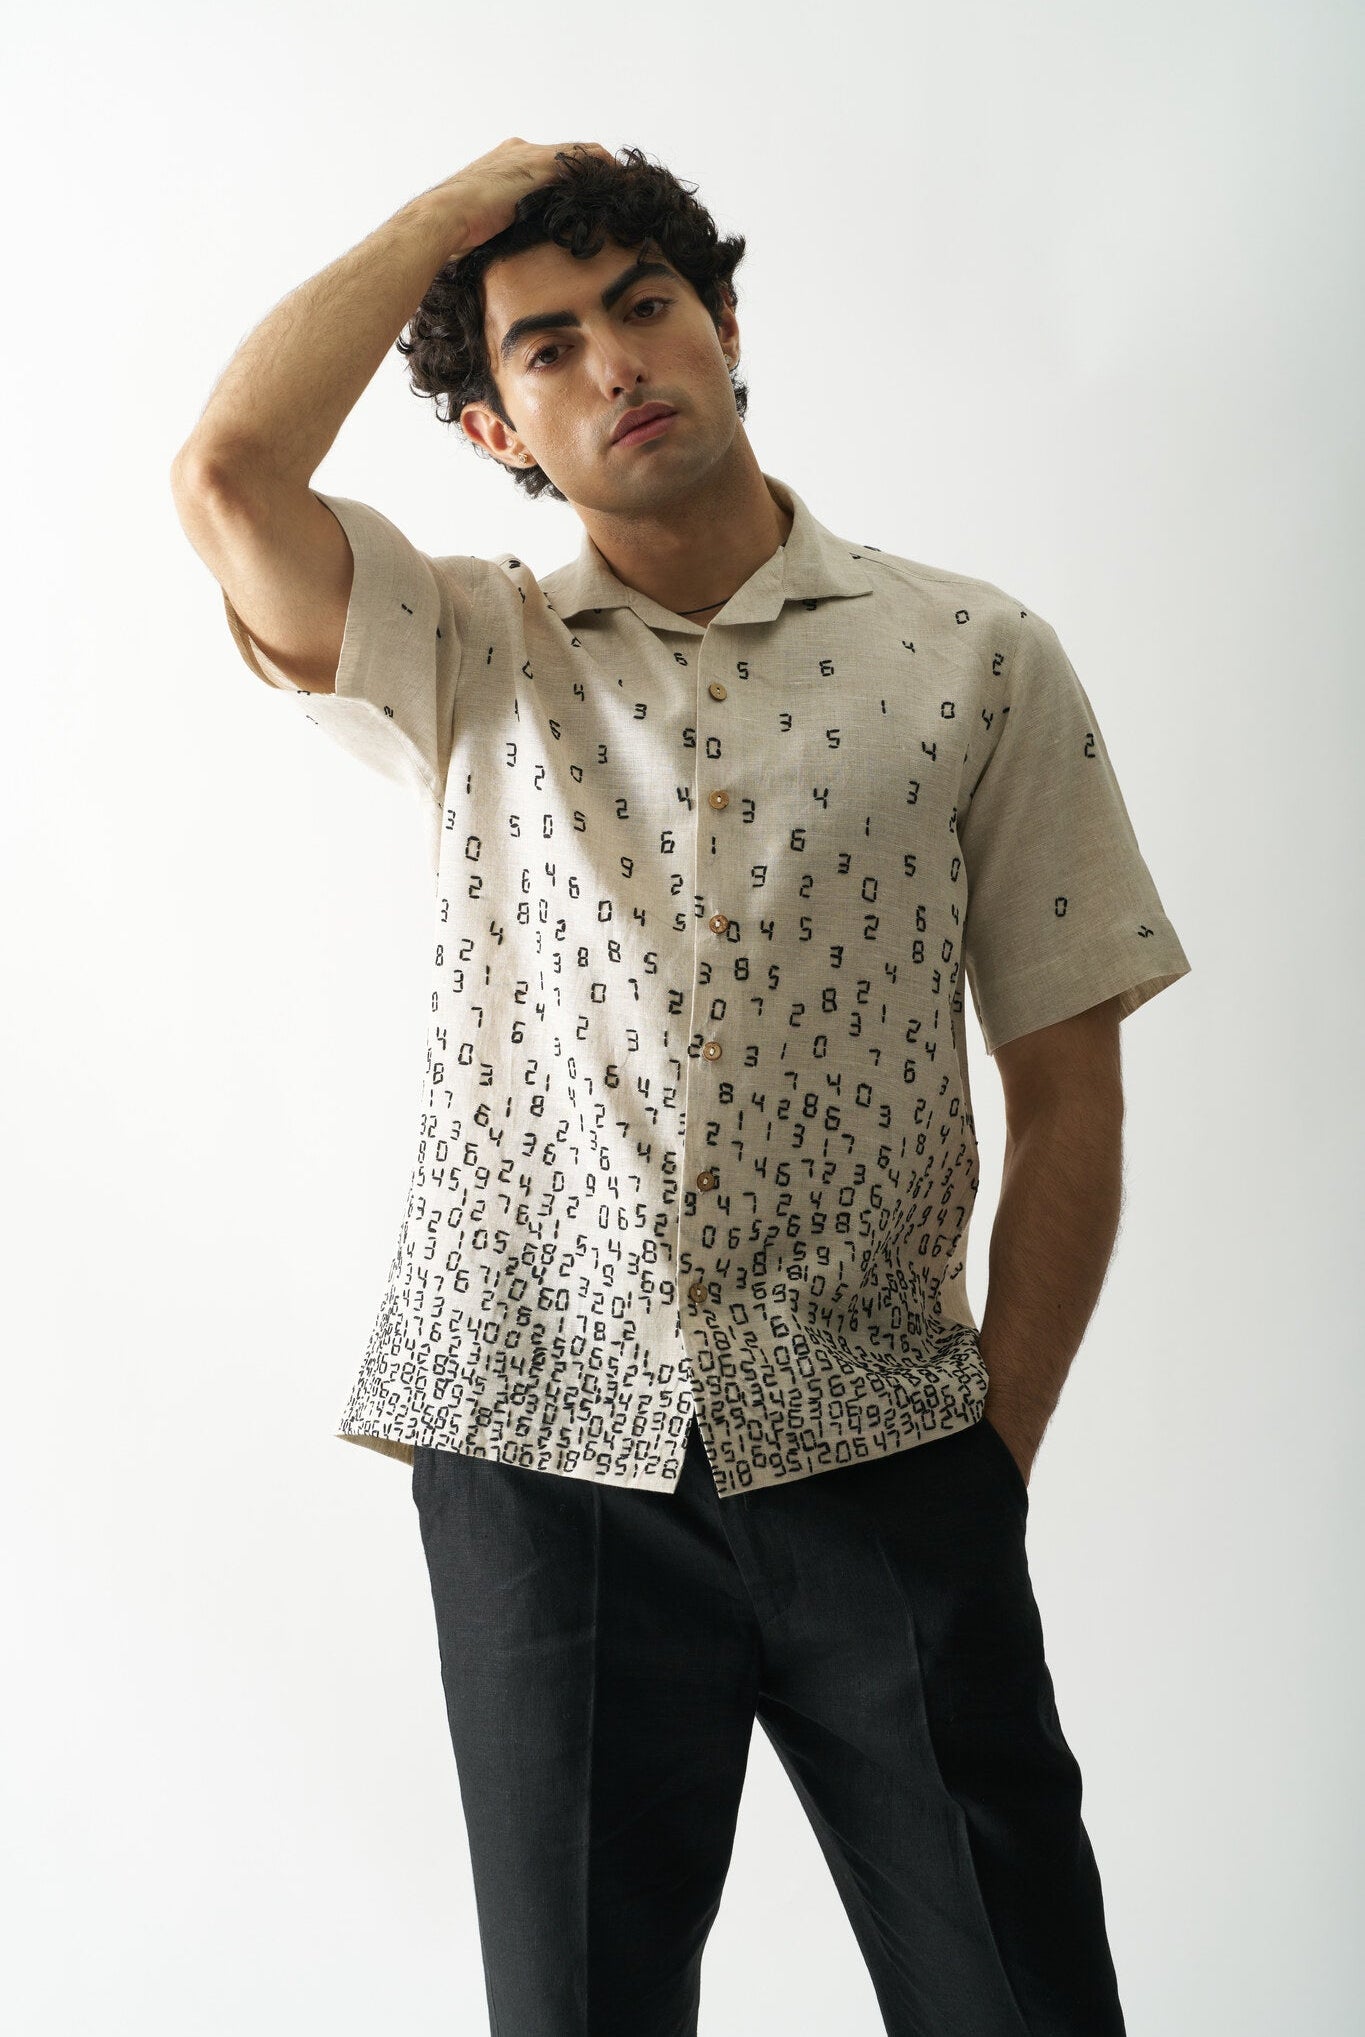 Mens Hand Embroidered Pure Linen Shirt - It's all about numbers - CiceroniShirtCultura Studio